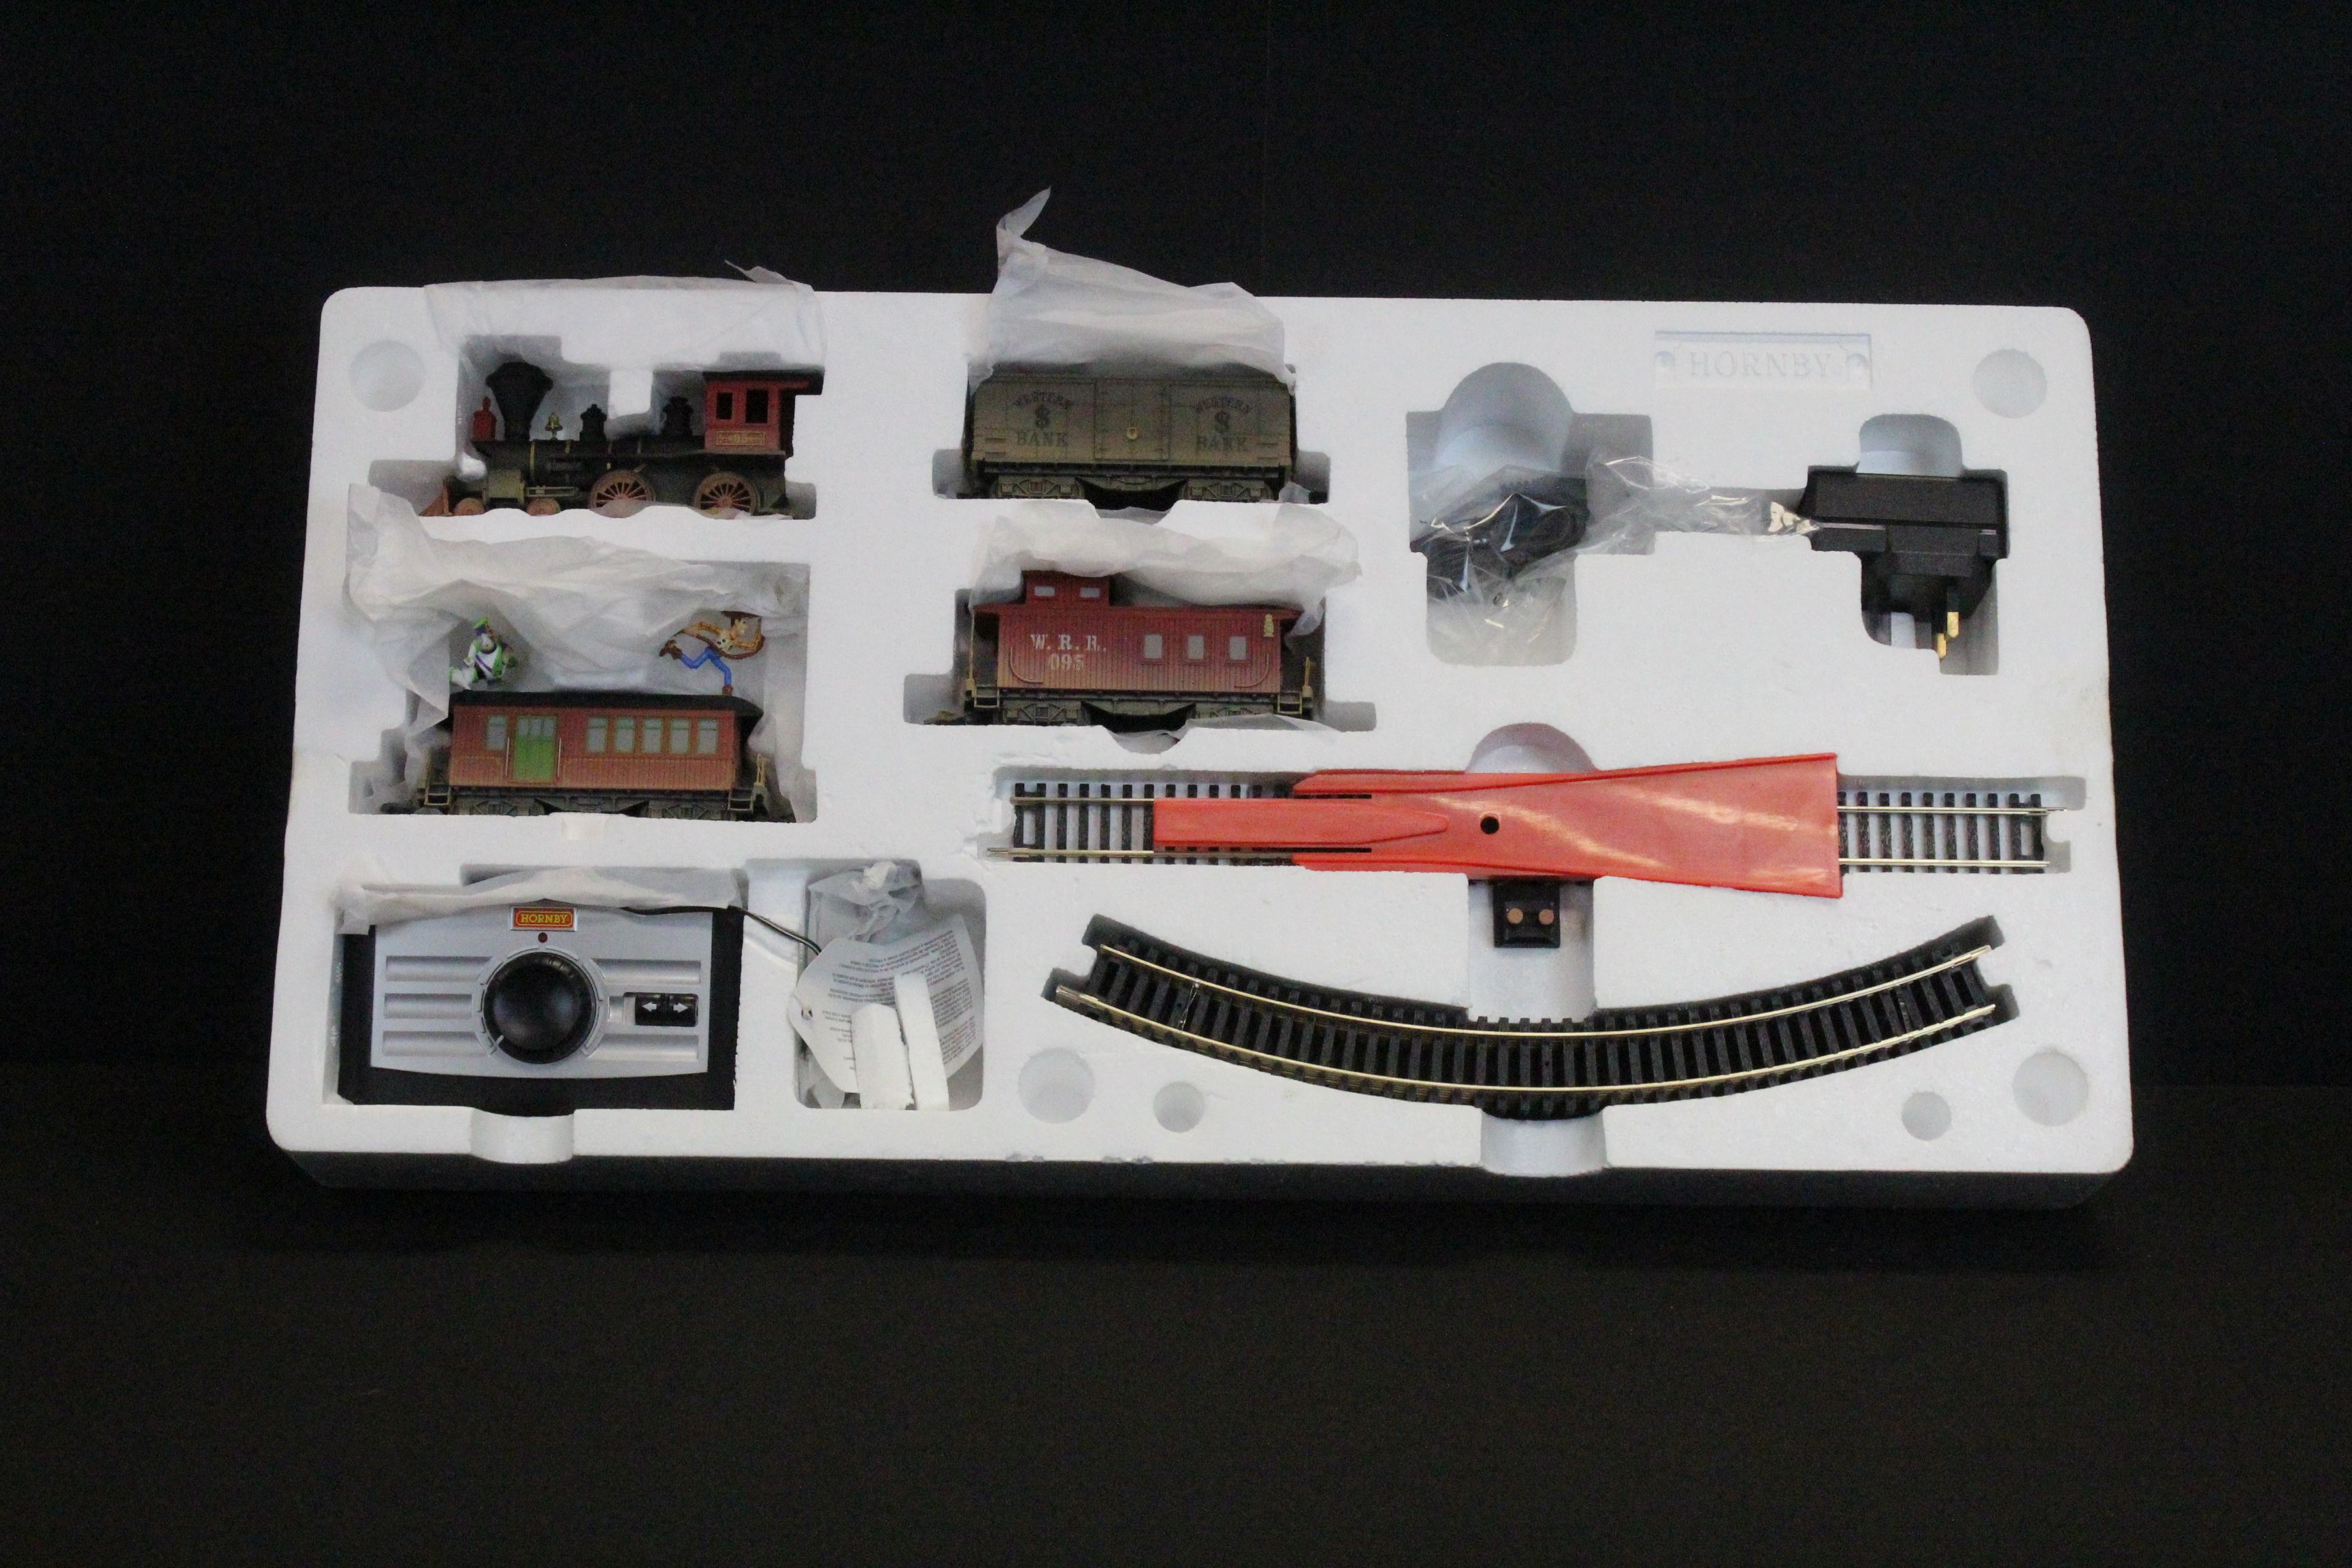 Boxed Hornby OO gauge R1149 Toy Story 3 train set, complete with locomotive, rolling stock etc - Image 4 of 7